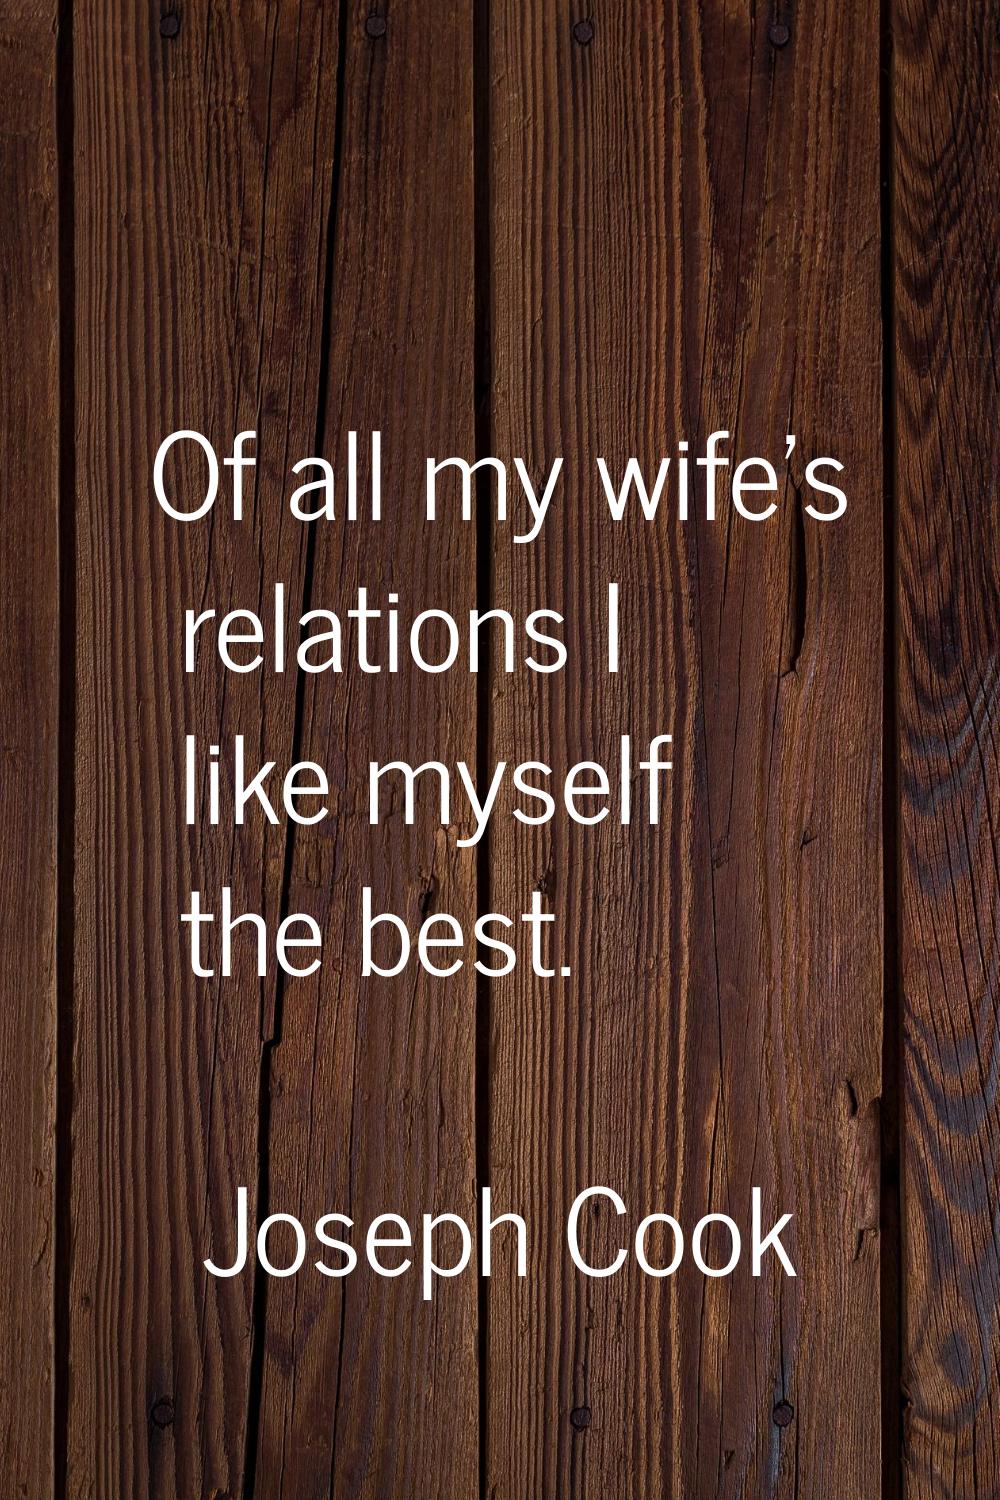 Of all my wife's relations I like myself the best.